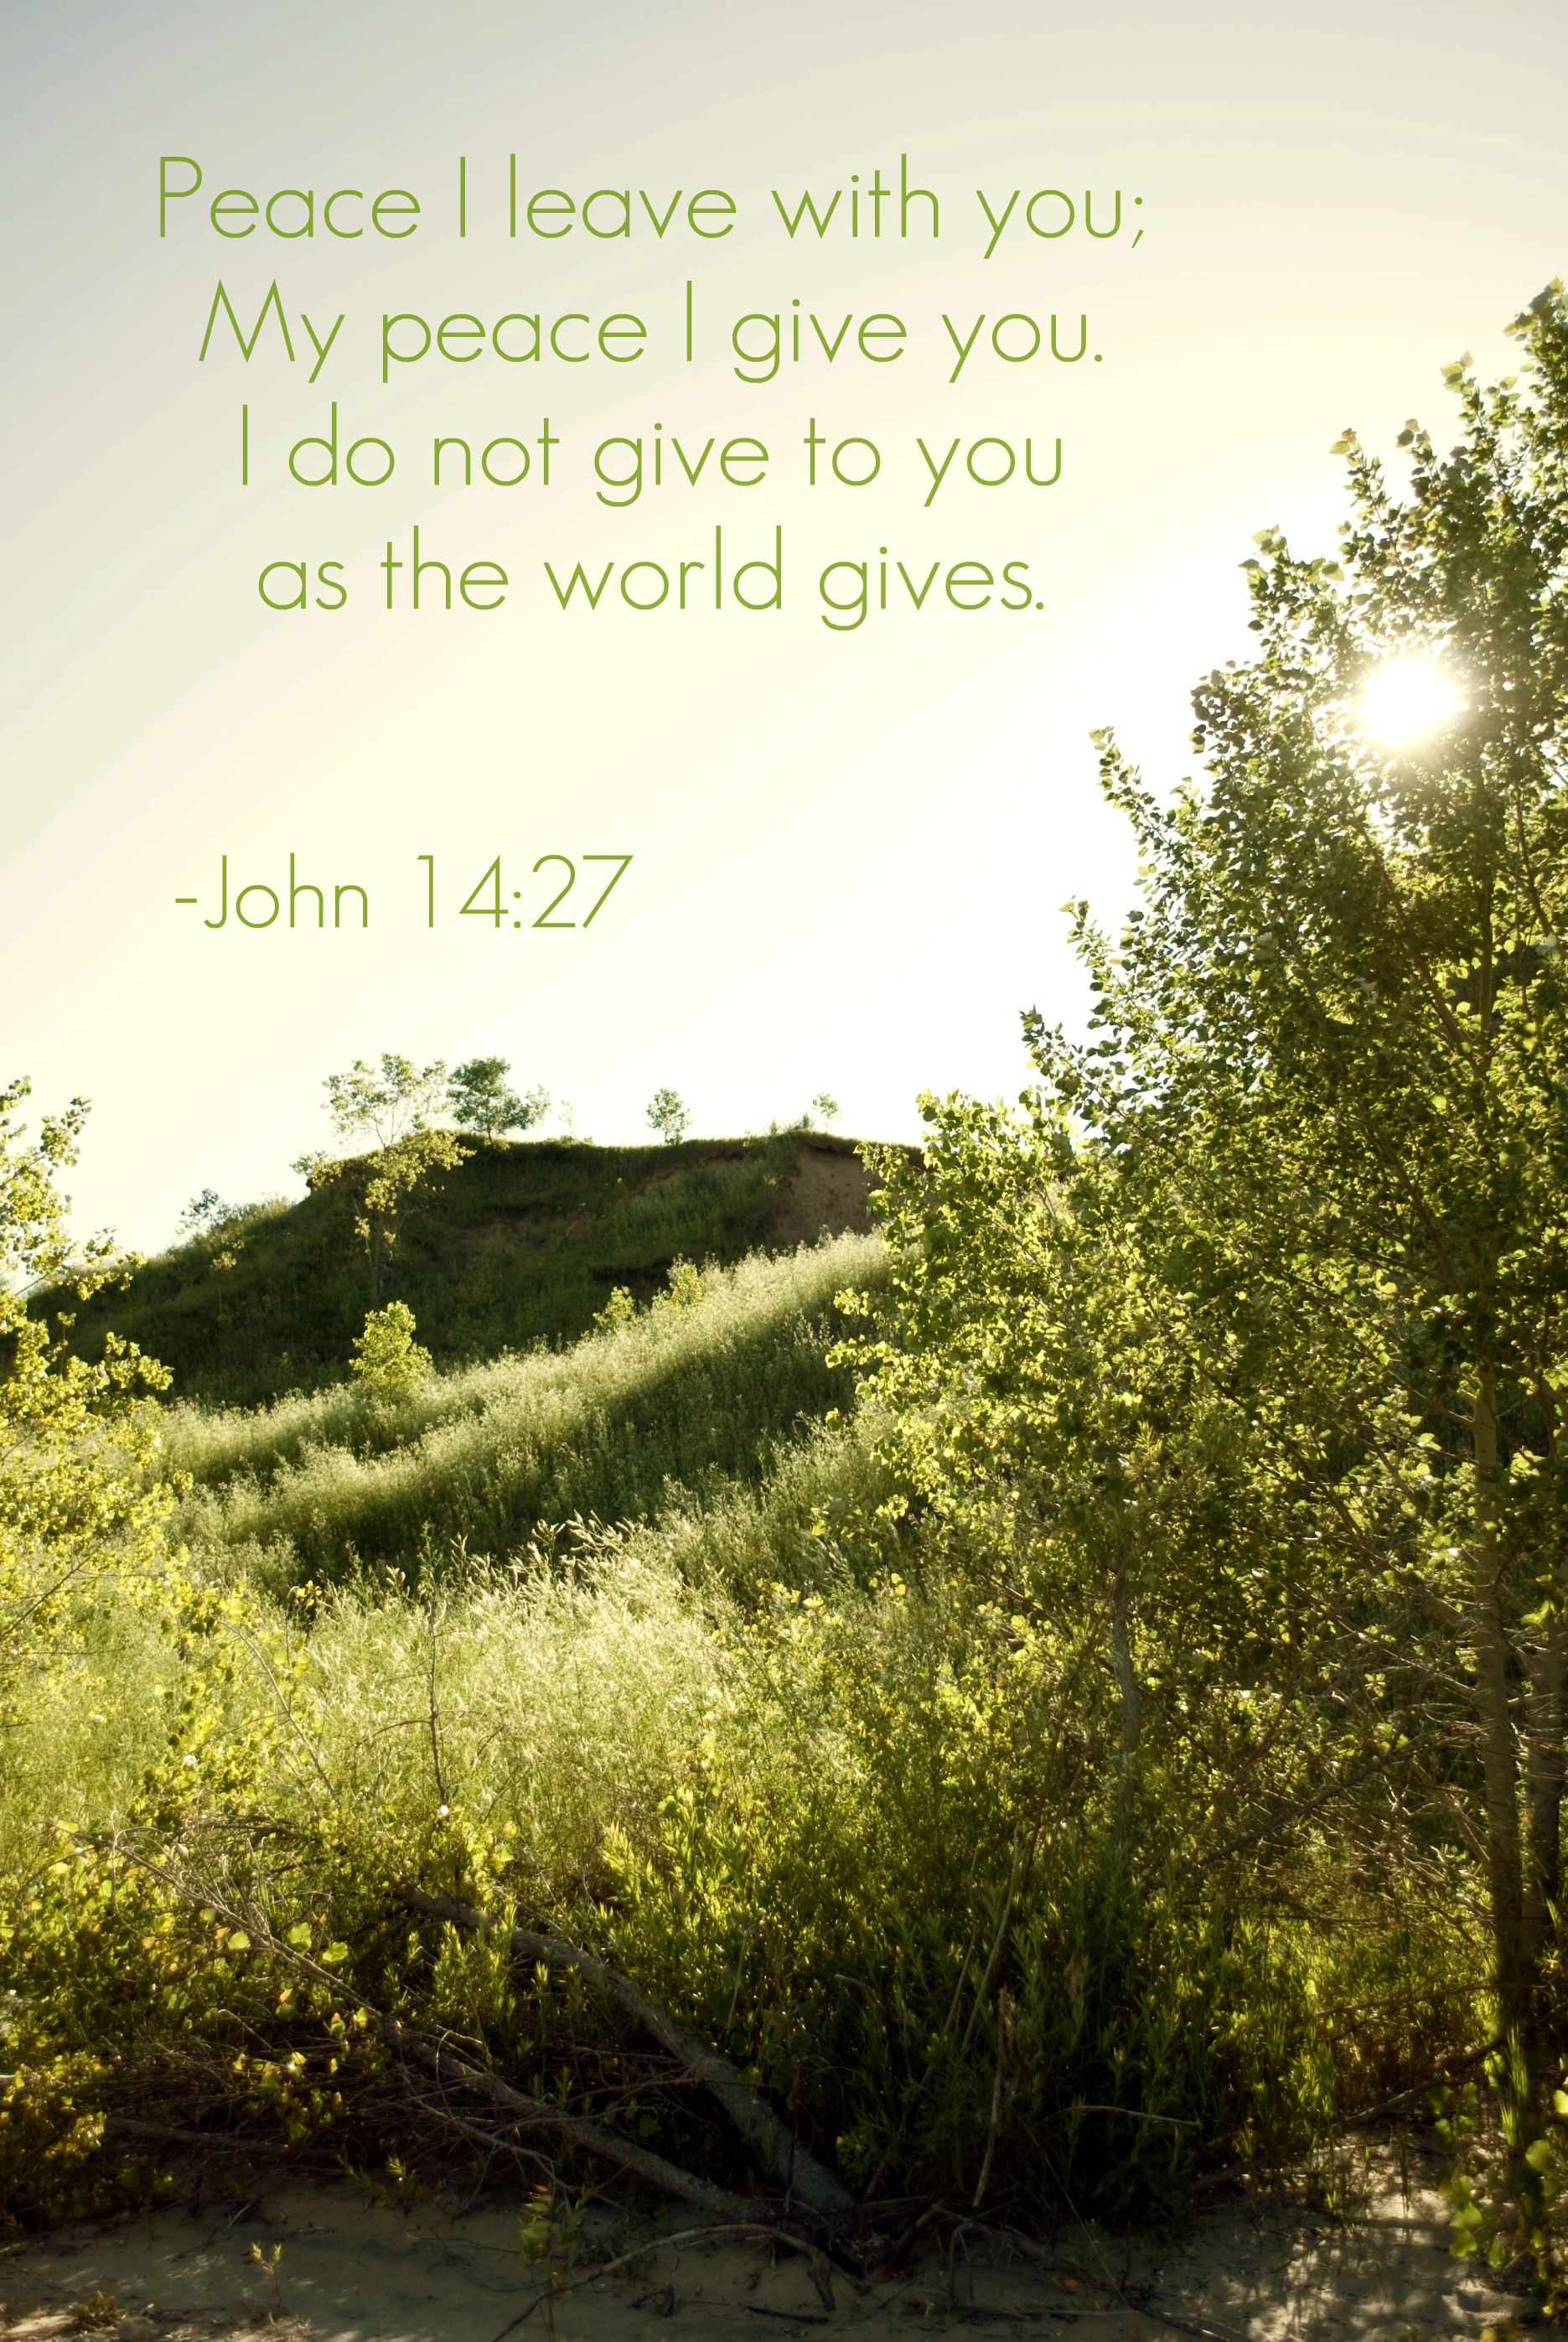 As You Give